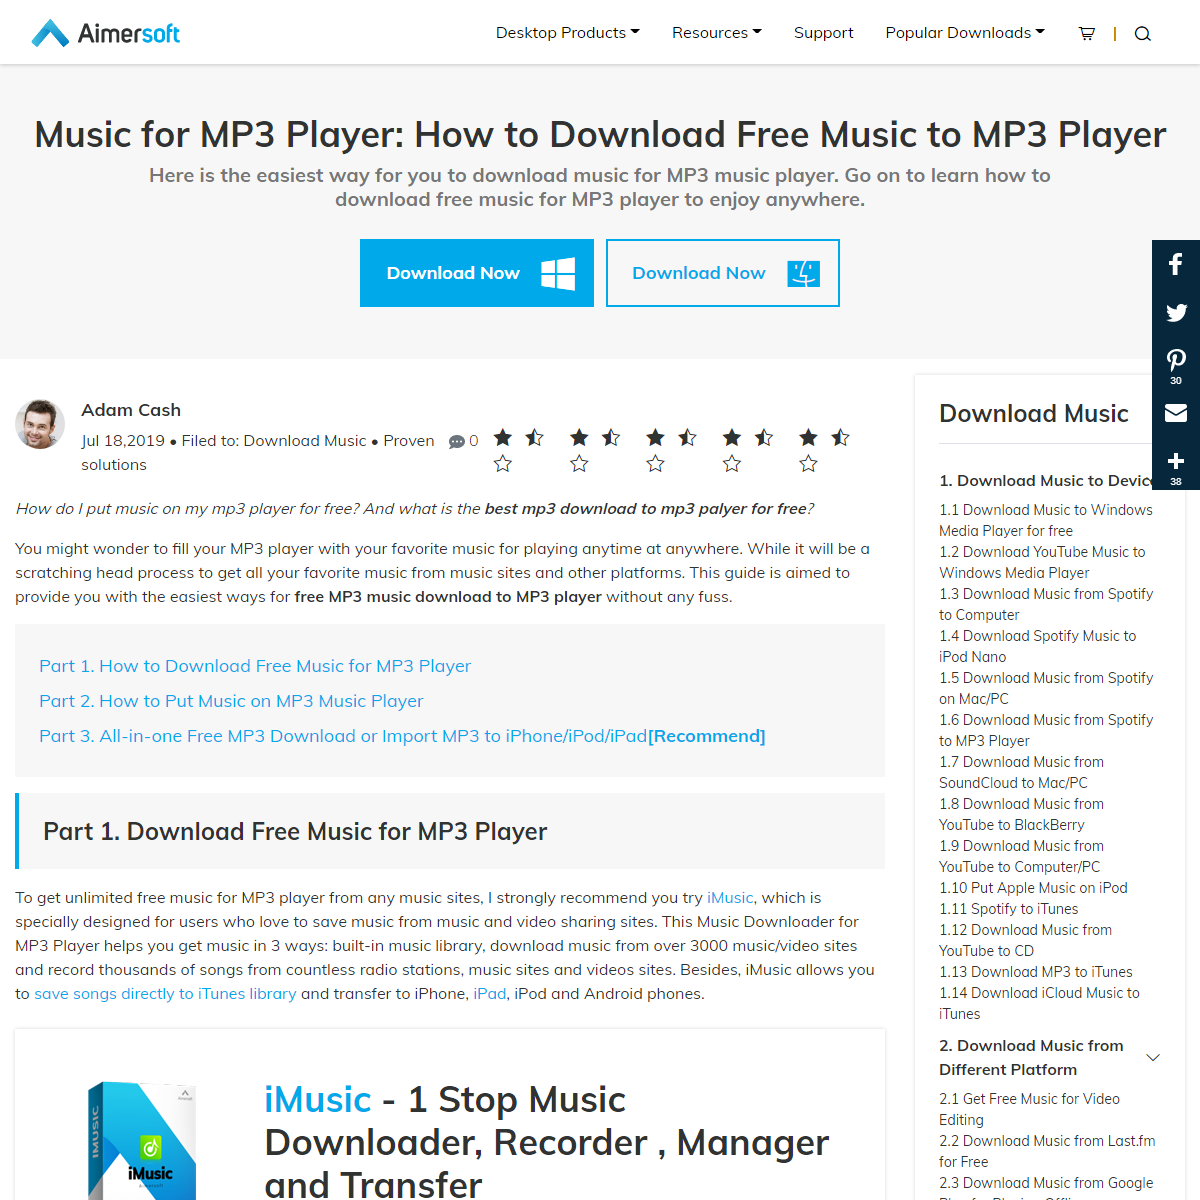 A complete backup of https://www.aimersoft.com/download-music/download-free-music-for-mp3-music-player.html